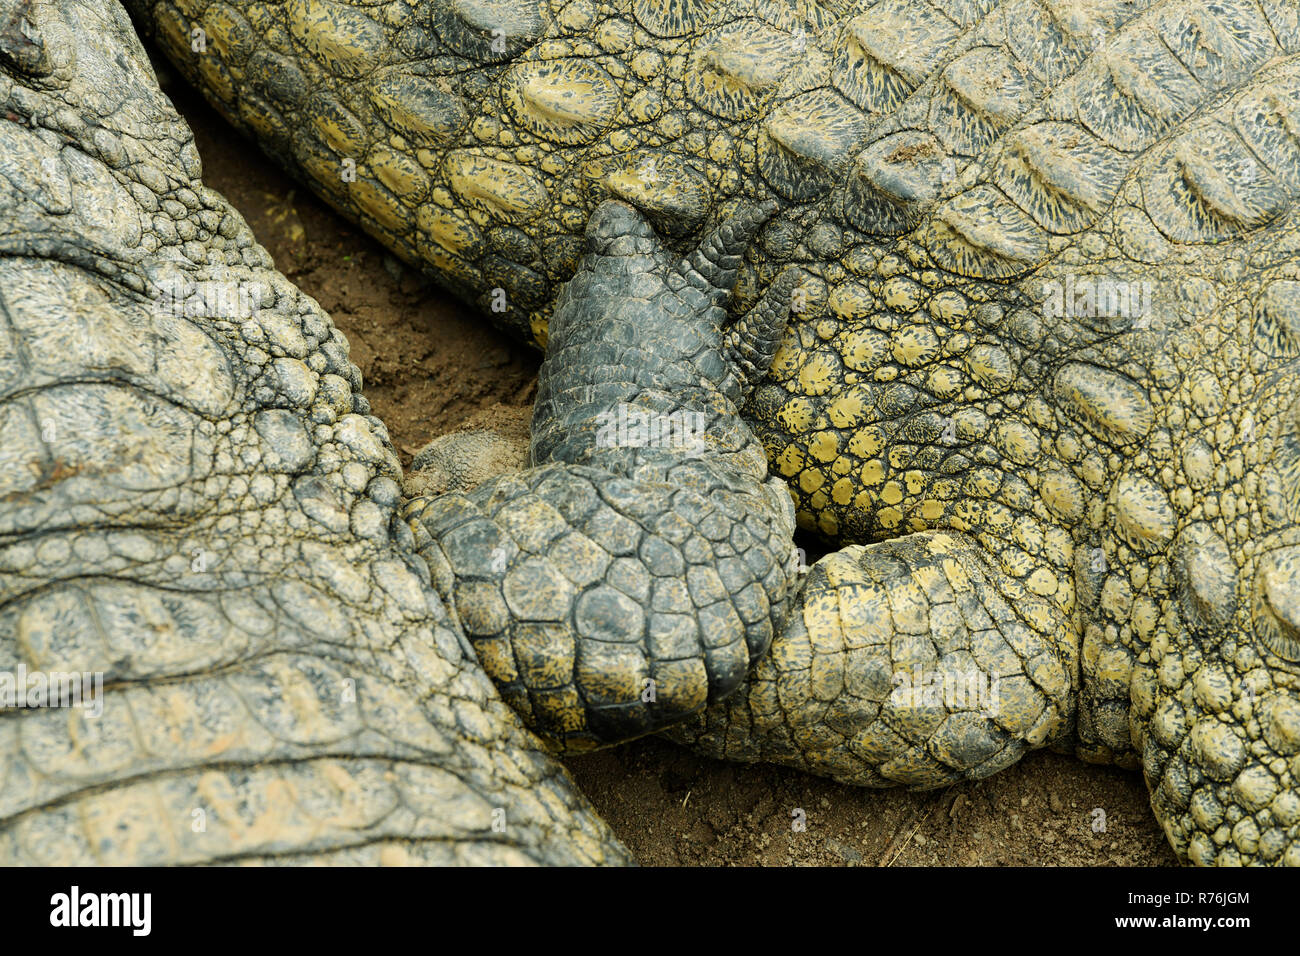 KwaZulu-Natal, South Africa, body parts of Nile Crocodile, Crocodylus niloticus, touching one another in captive conditions of animal farm Stock Photo